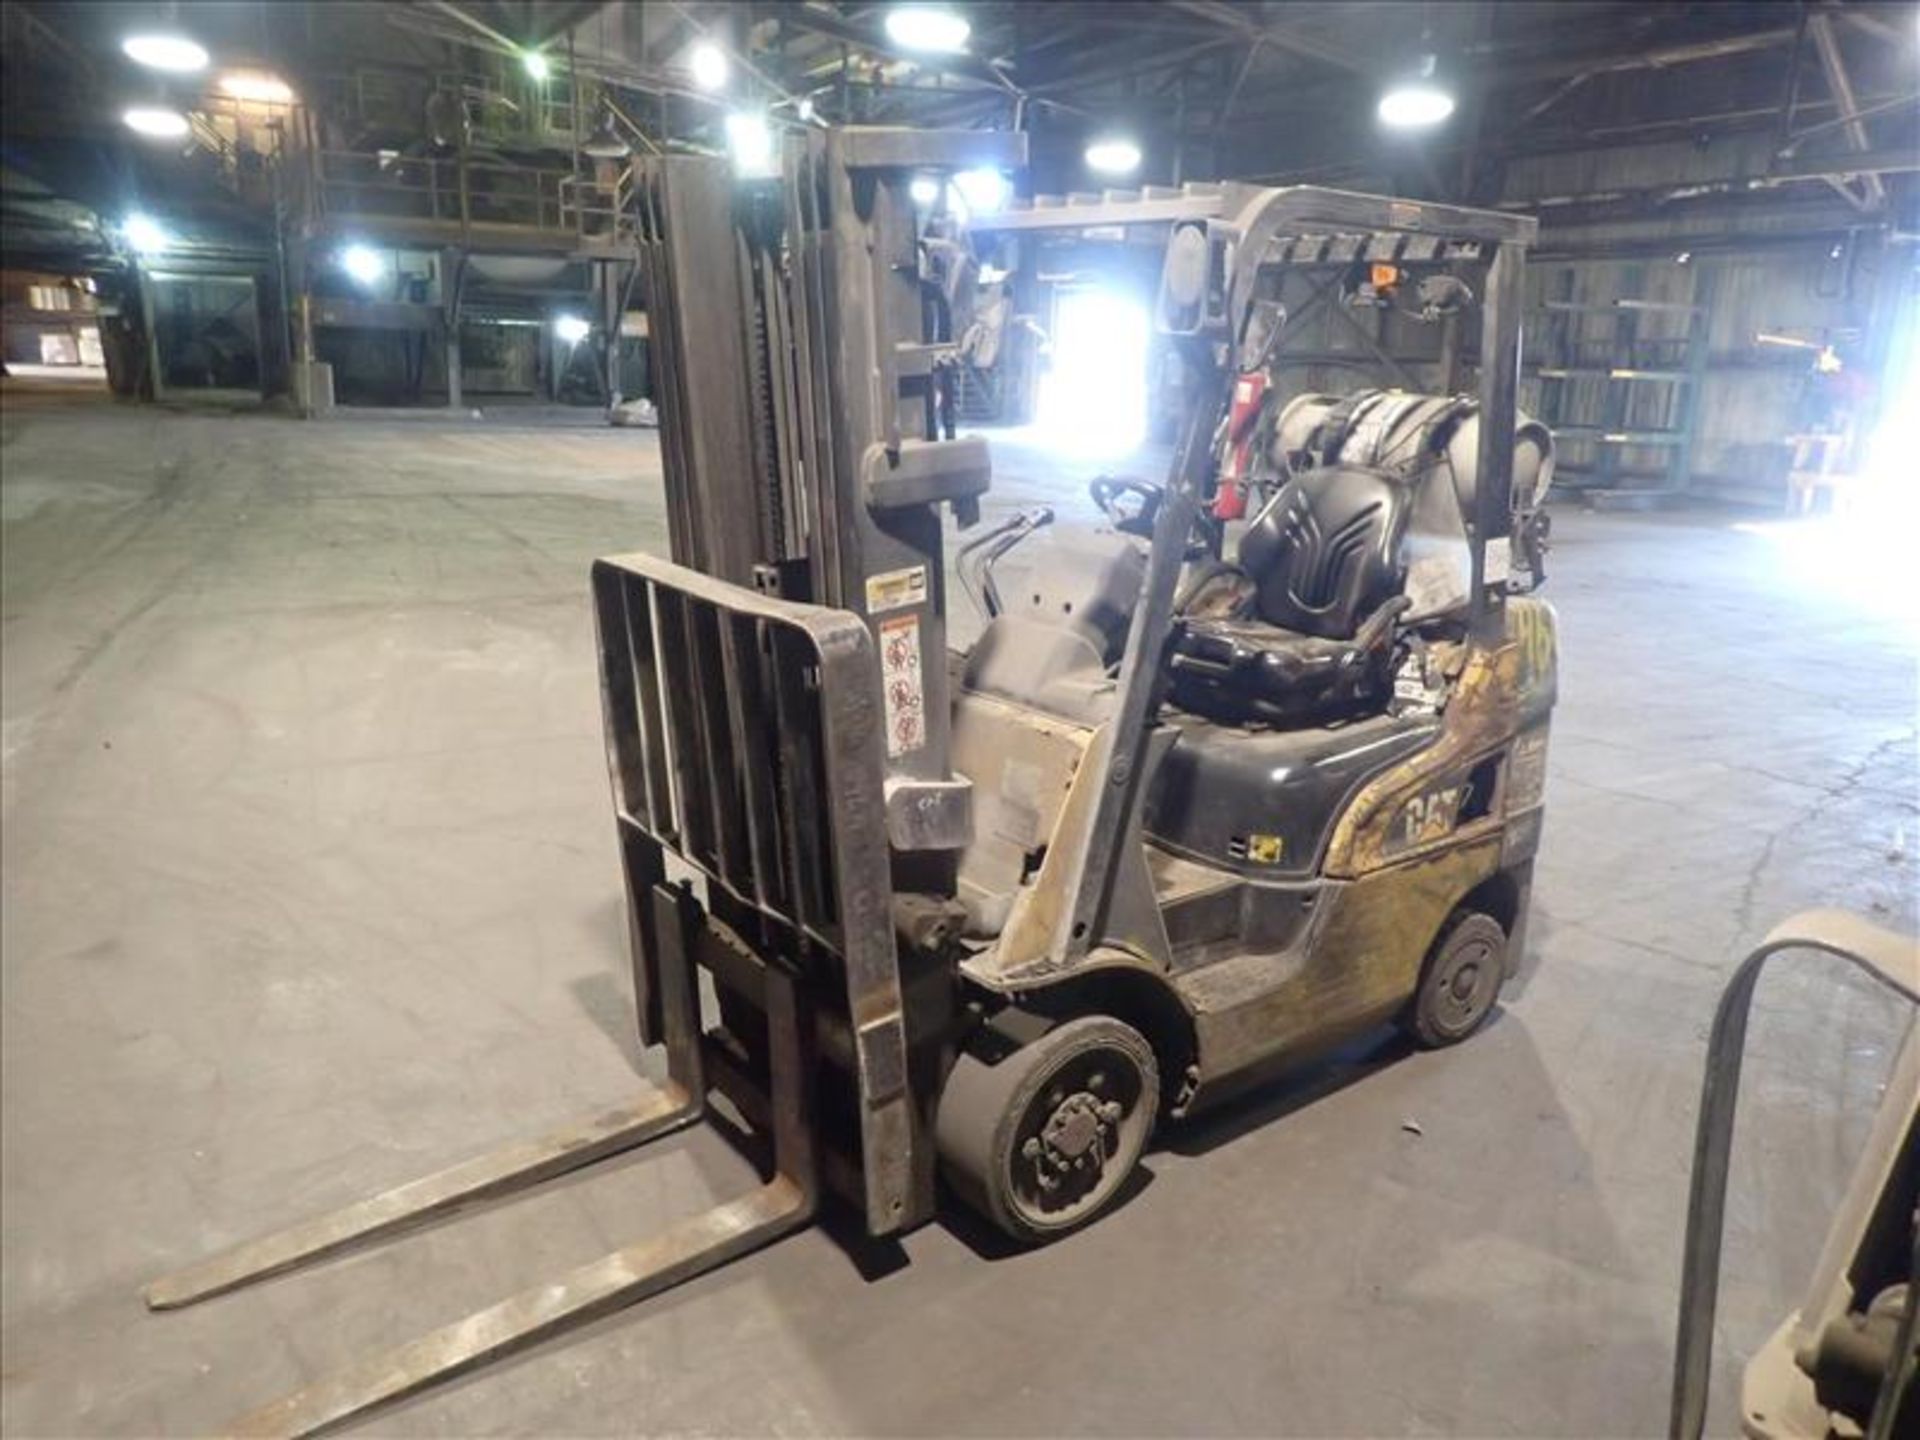 CAT forklift truck, mod. N/A, ser. no. N/A, N/A lbs cap., propane, 3-stage mast, hour meter reads